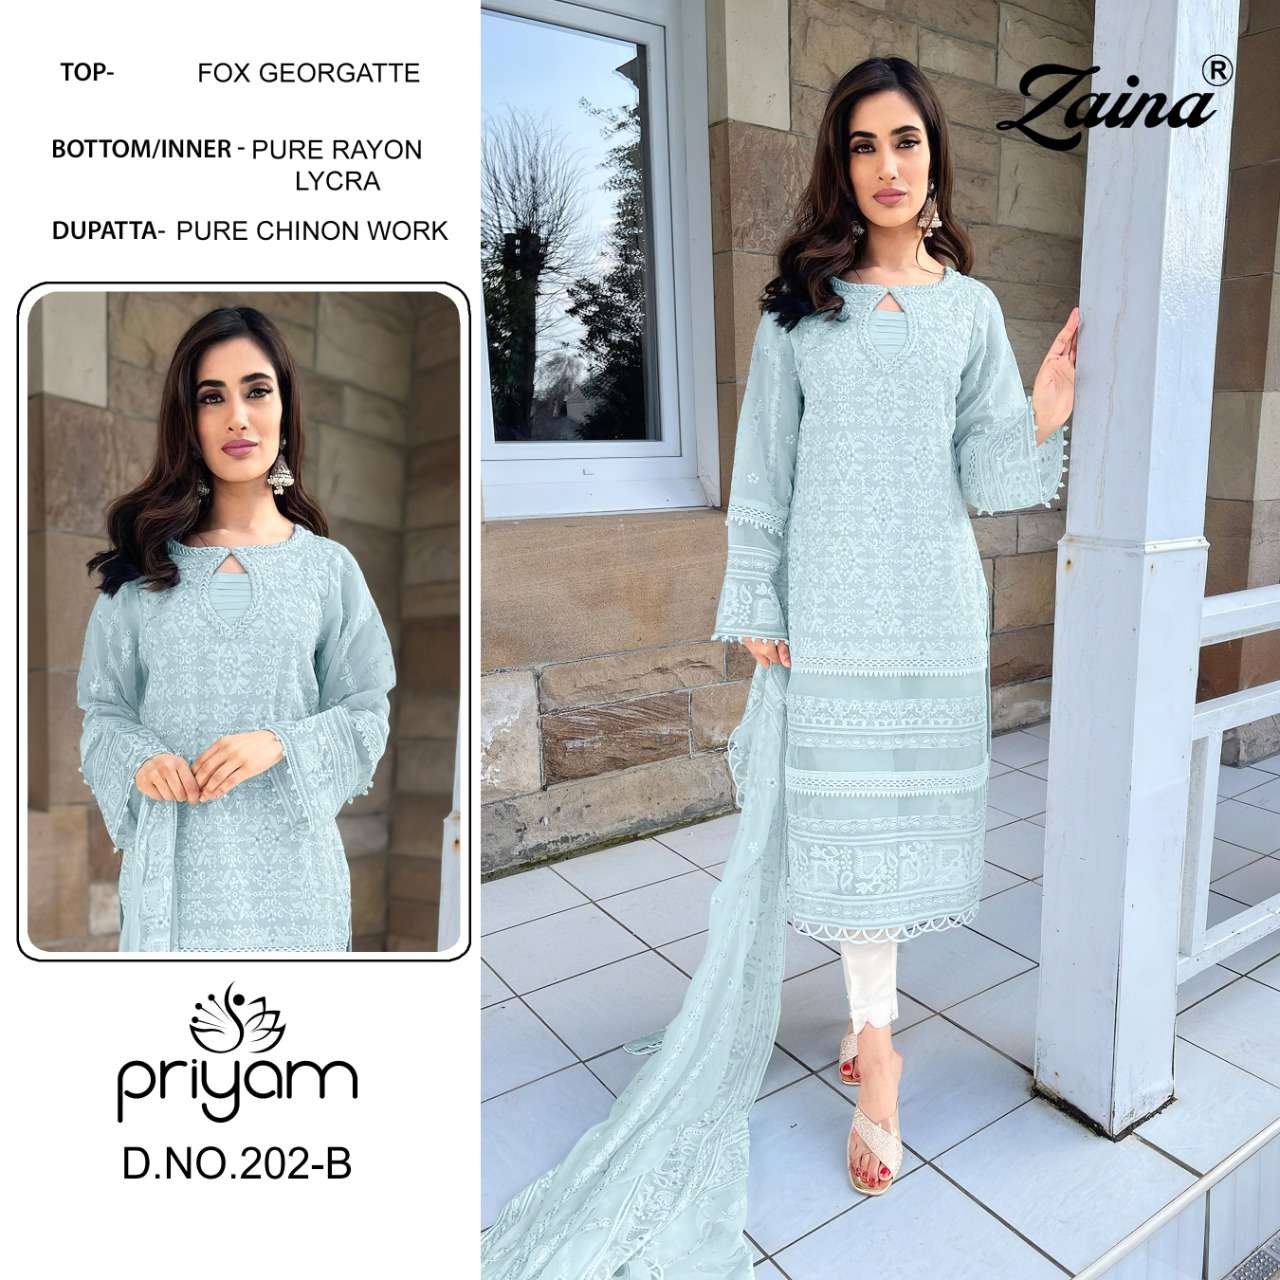 ZAINA 200 SERIES BY PRIYAM 200-A TO 207-B SERIES BEAUTIFUL PAKISTANI SUITS COLORFUL STYLISH FANCY CASUAL WEAR & ETHNIC WEAR FAUX GEORGETTE DRESSES AT WHOLESALE PRICE